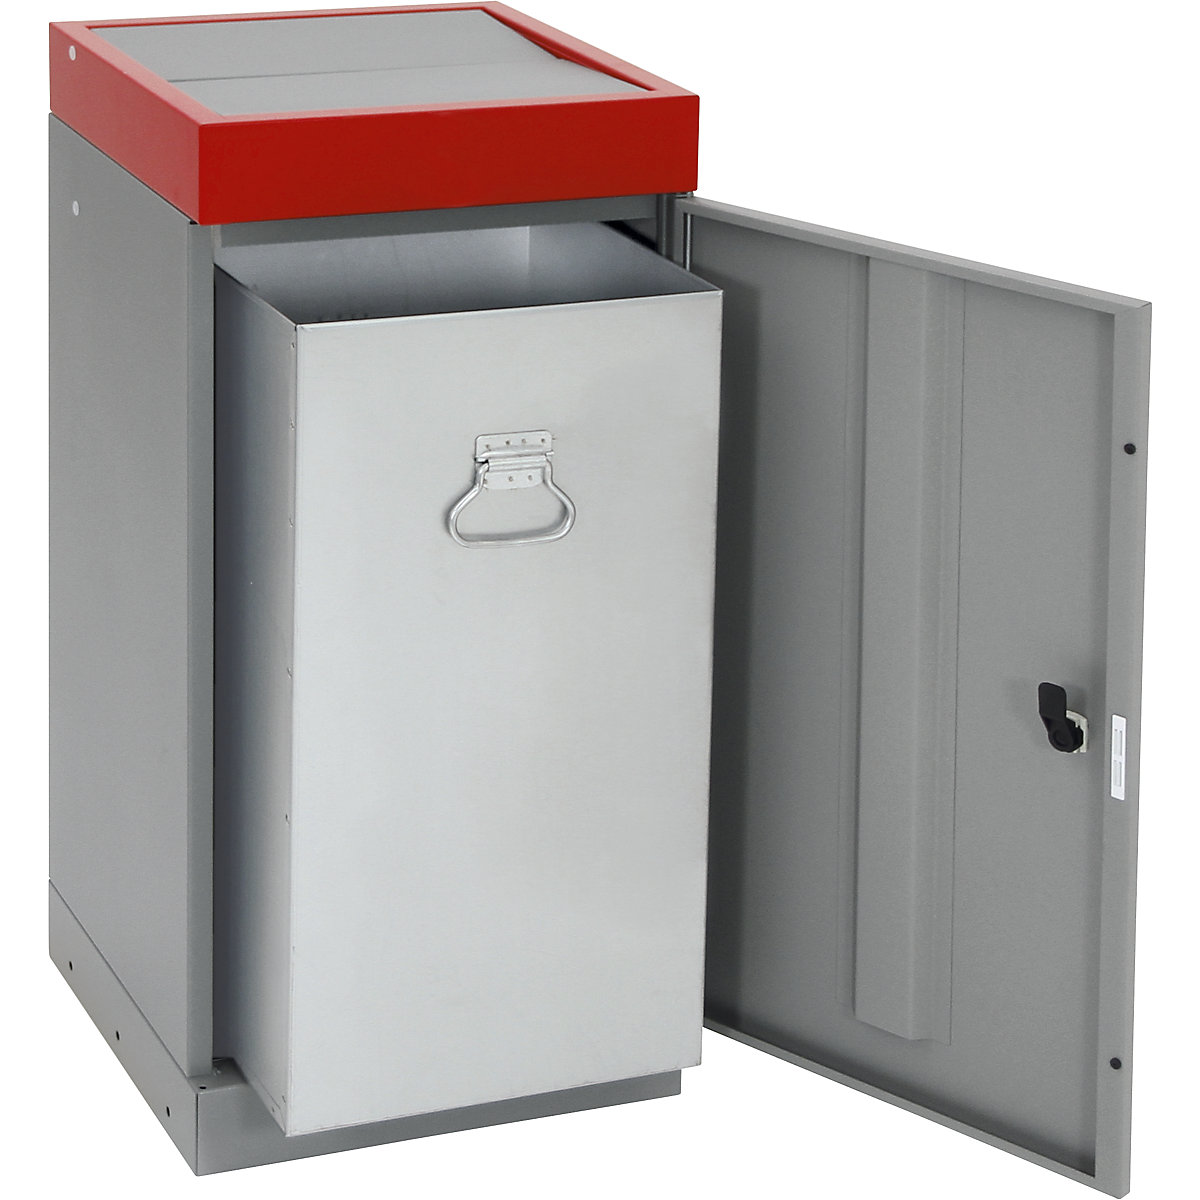 Recyclable waste collector with hinged door, individual unit, capacity 70 l, red lid-10